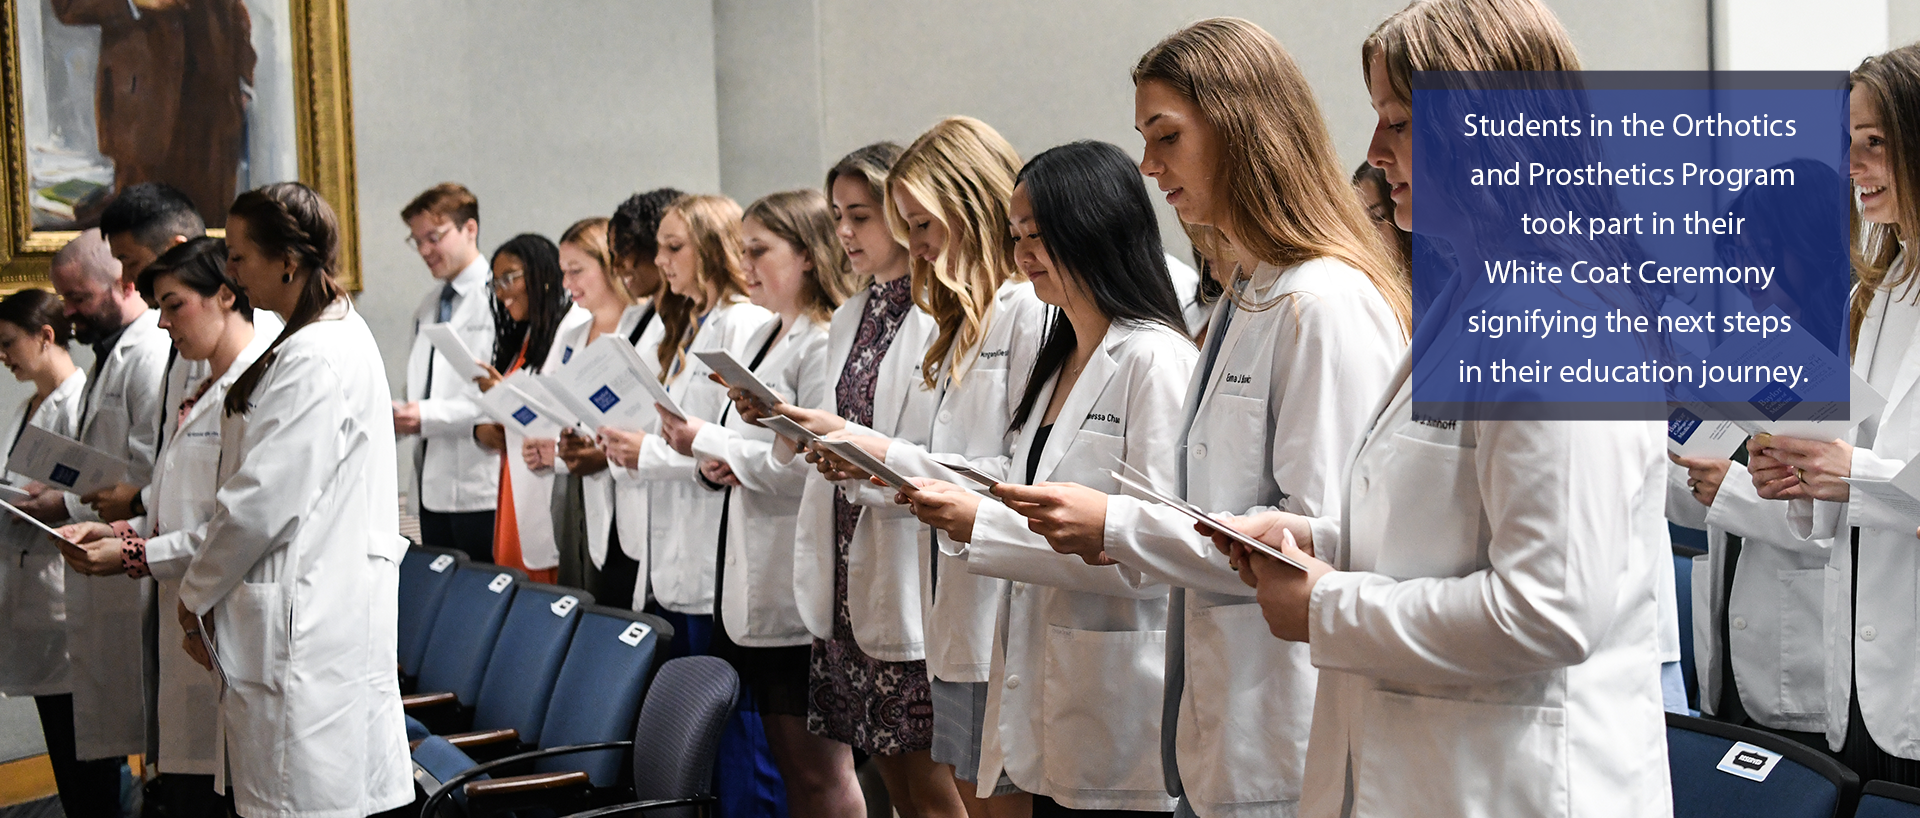 Students in the Orthotics and Prosthetics Program took part in their White Coat Ceremony signifying the next steps in their education journey. 